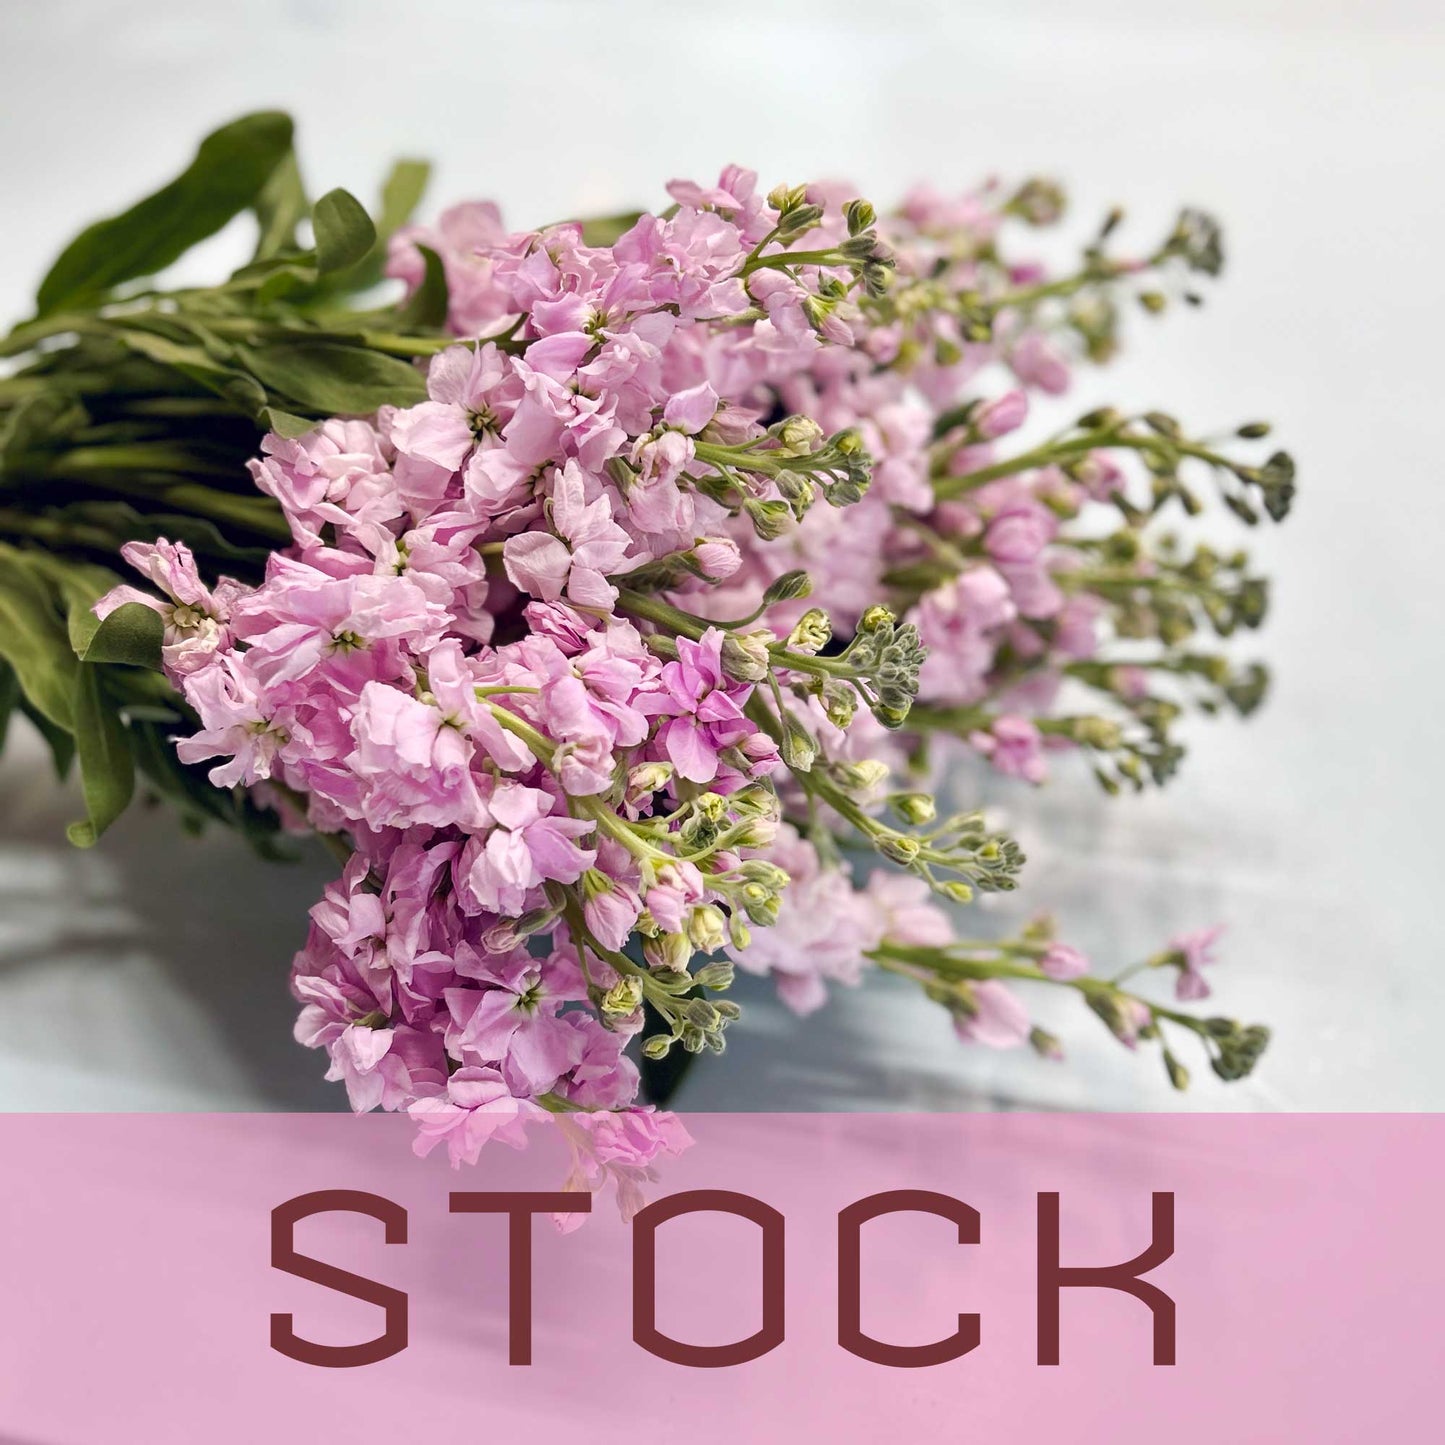 Behind the Bloom: Stock In Trade